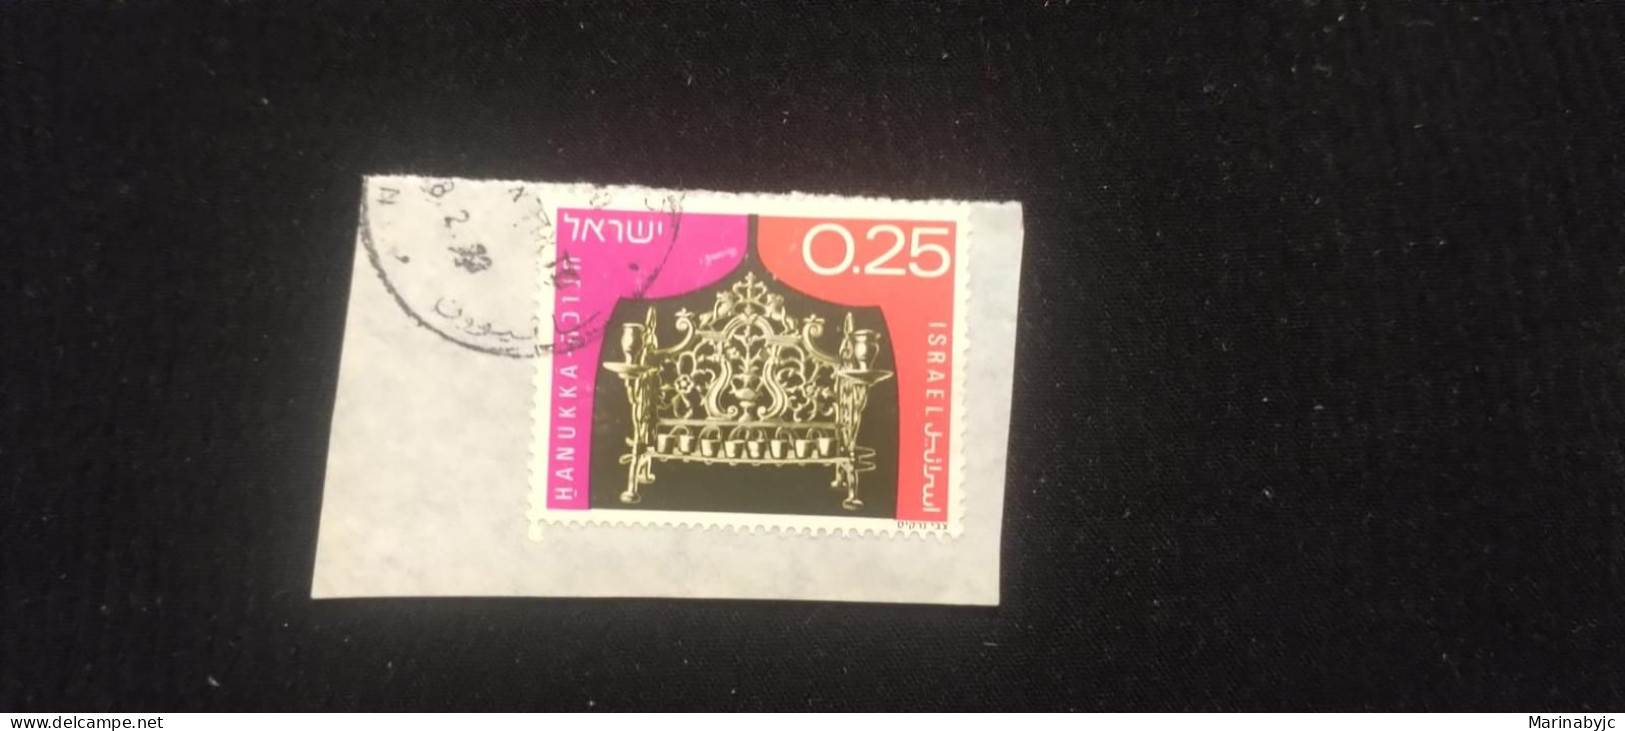 C) 569. 1972. ISRAEL. ENVELOPE SHEET WITH POLAND STAMP, 18TH CENTURY, BRASS. UC. USED. - Asia (Other)